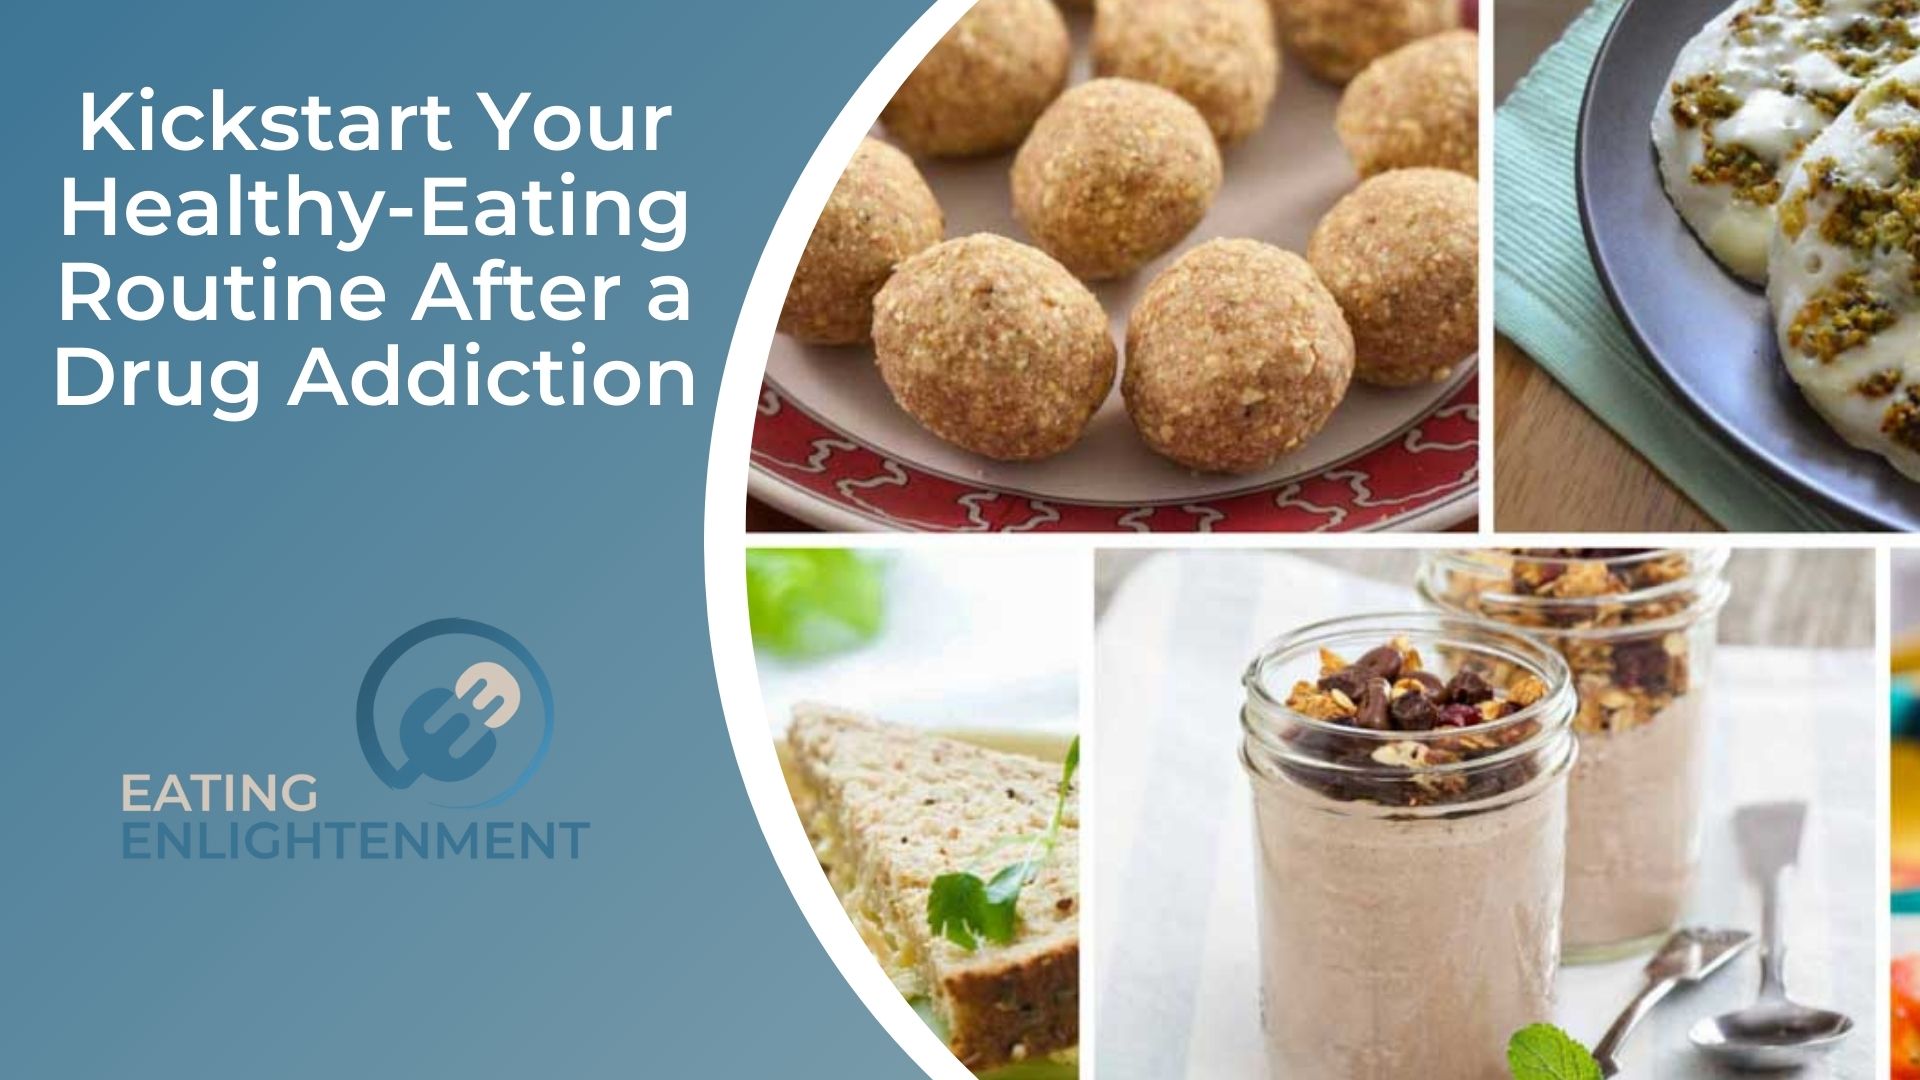 Kickstart Your Healthy-Eating Routine After a Drug Addiction